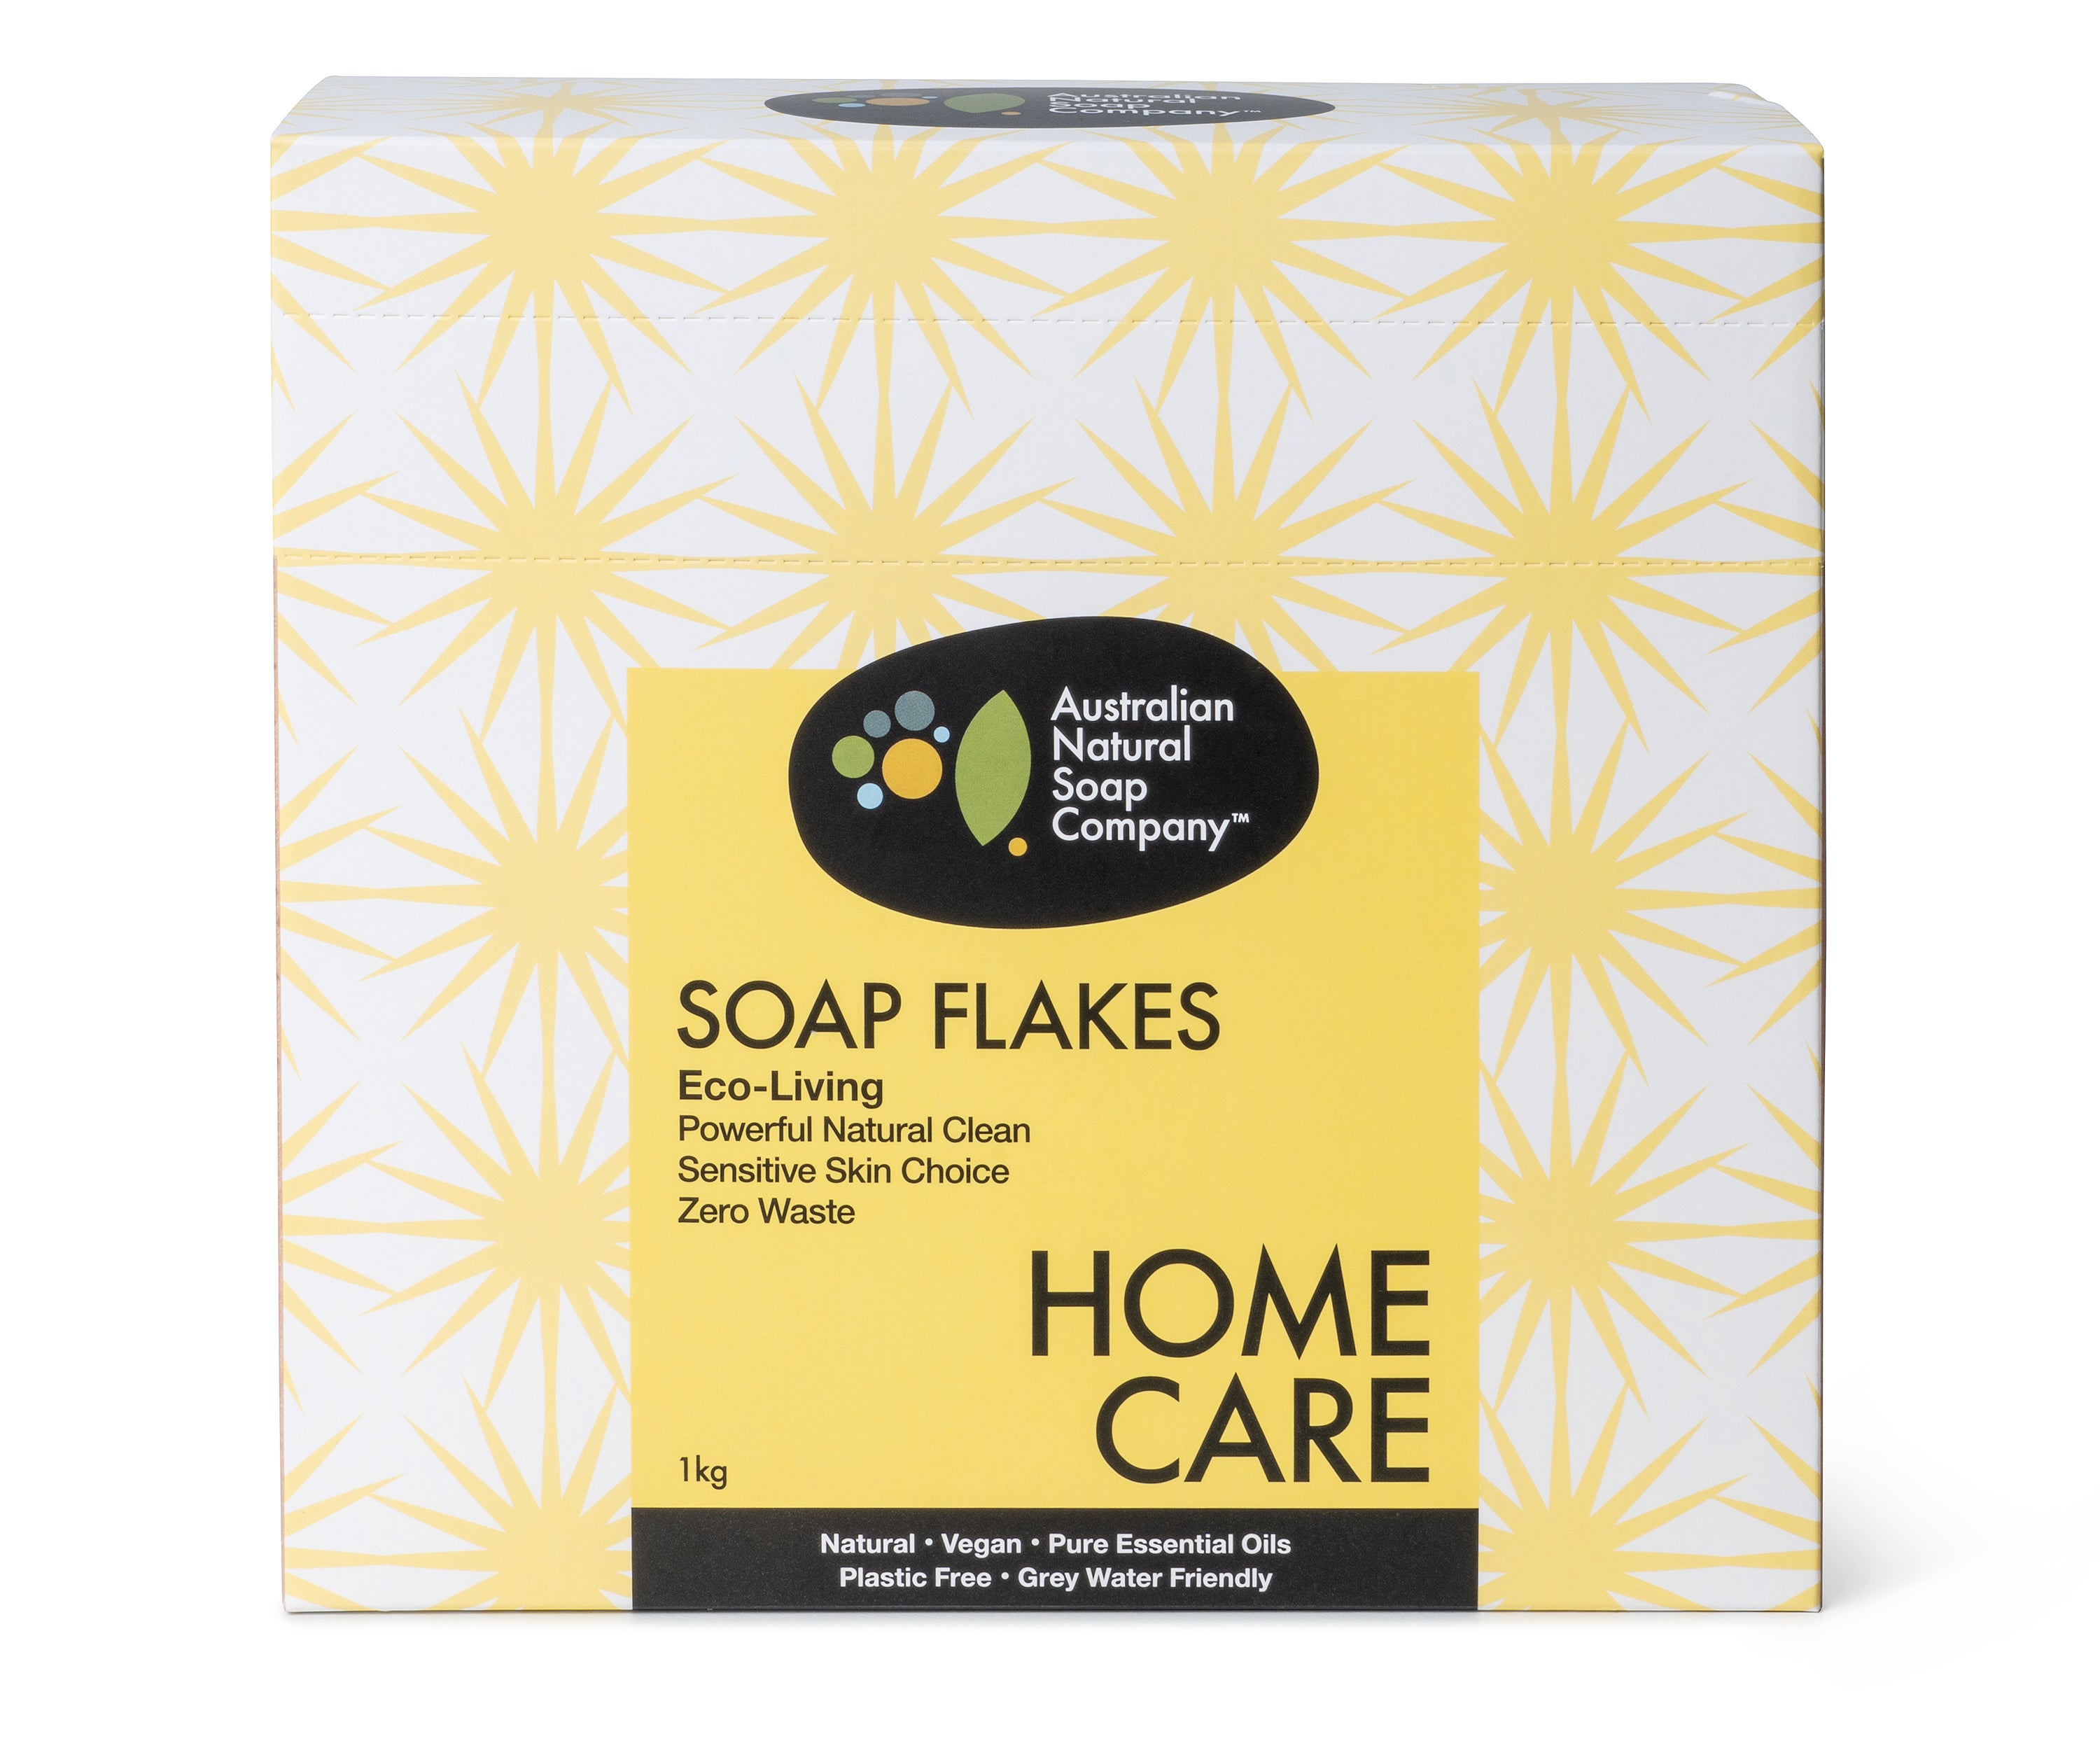 All Natural Soap Flakes (Recyclable Only Packaging)